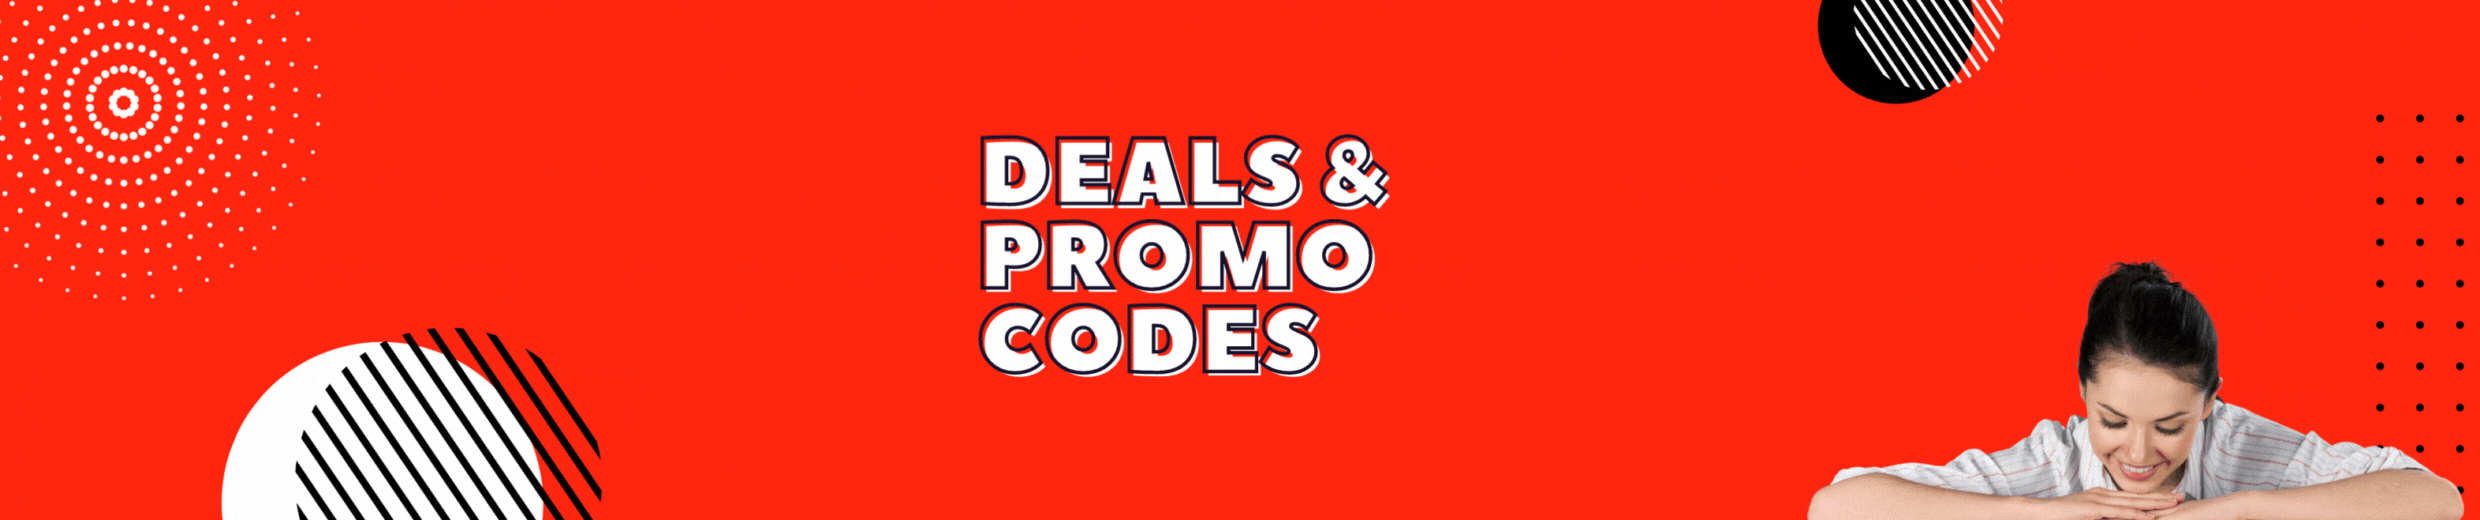 Coaching Business Deals Promo Codes Ad Banner